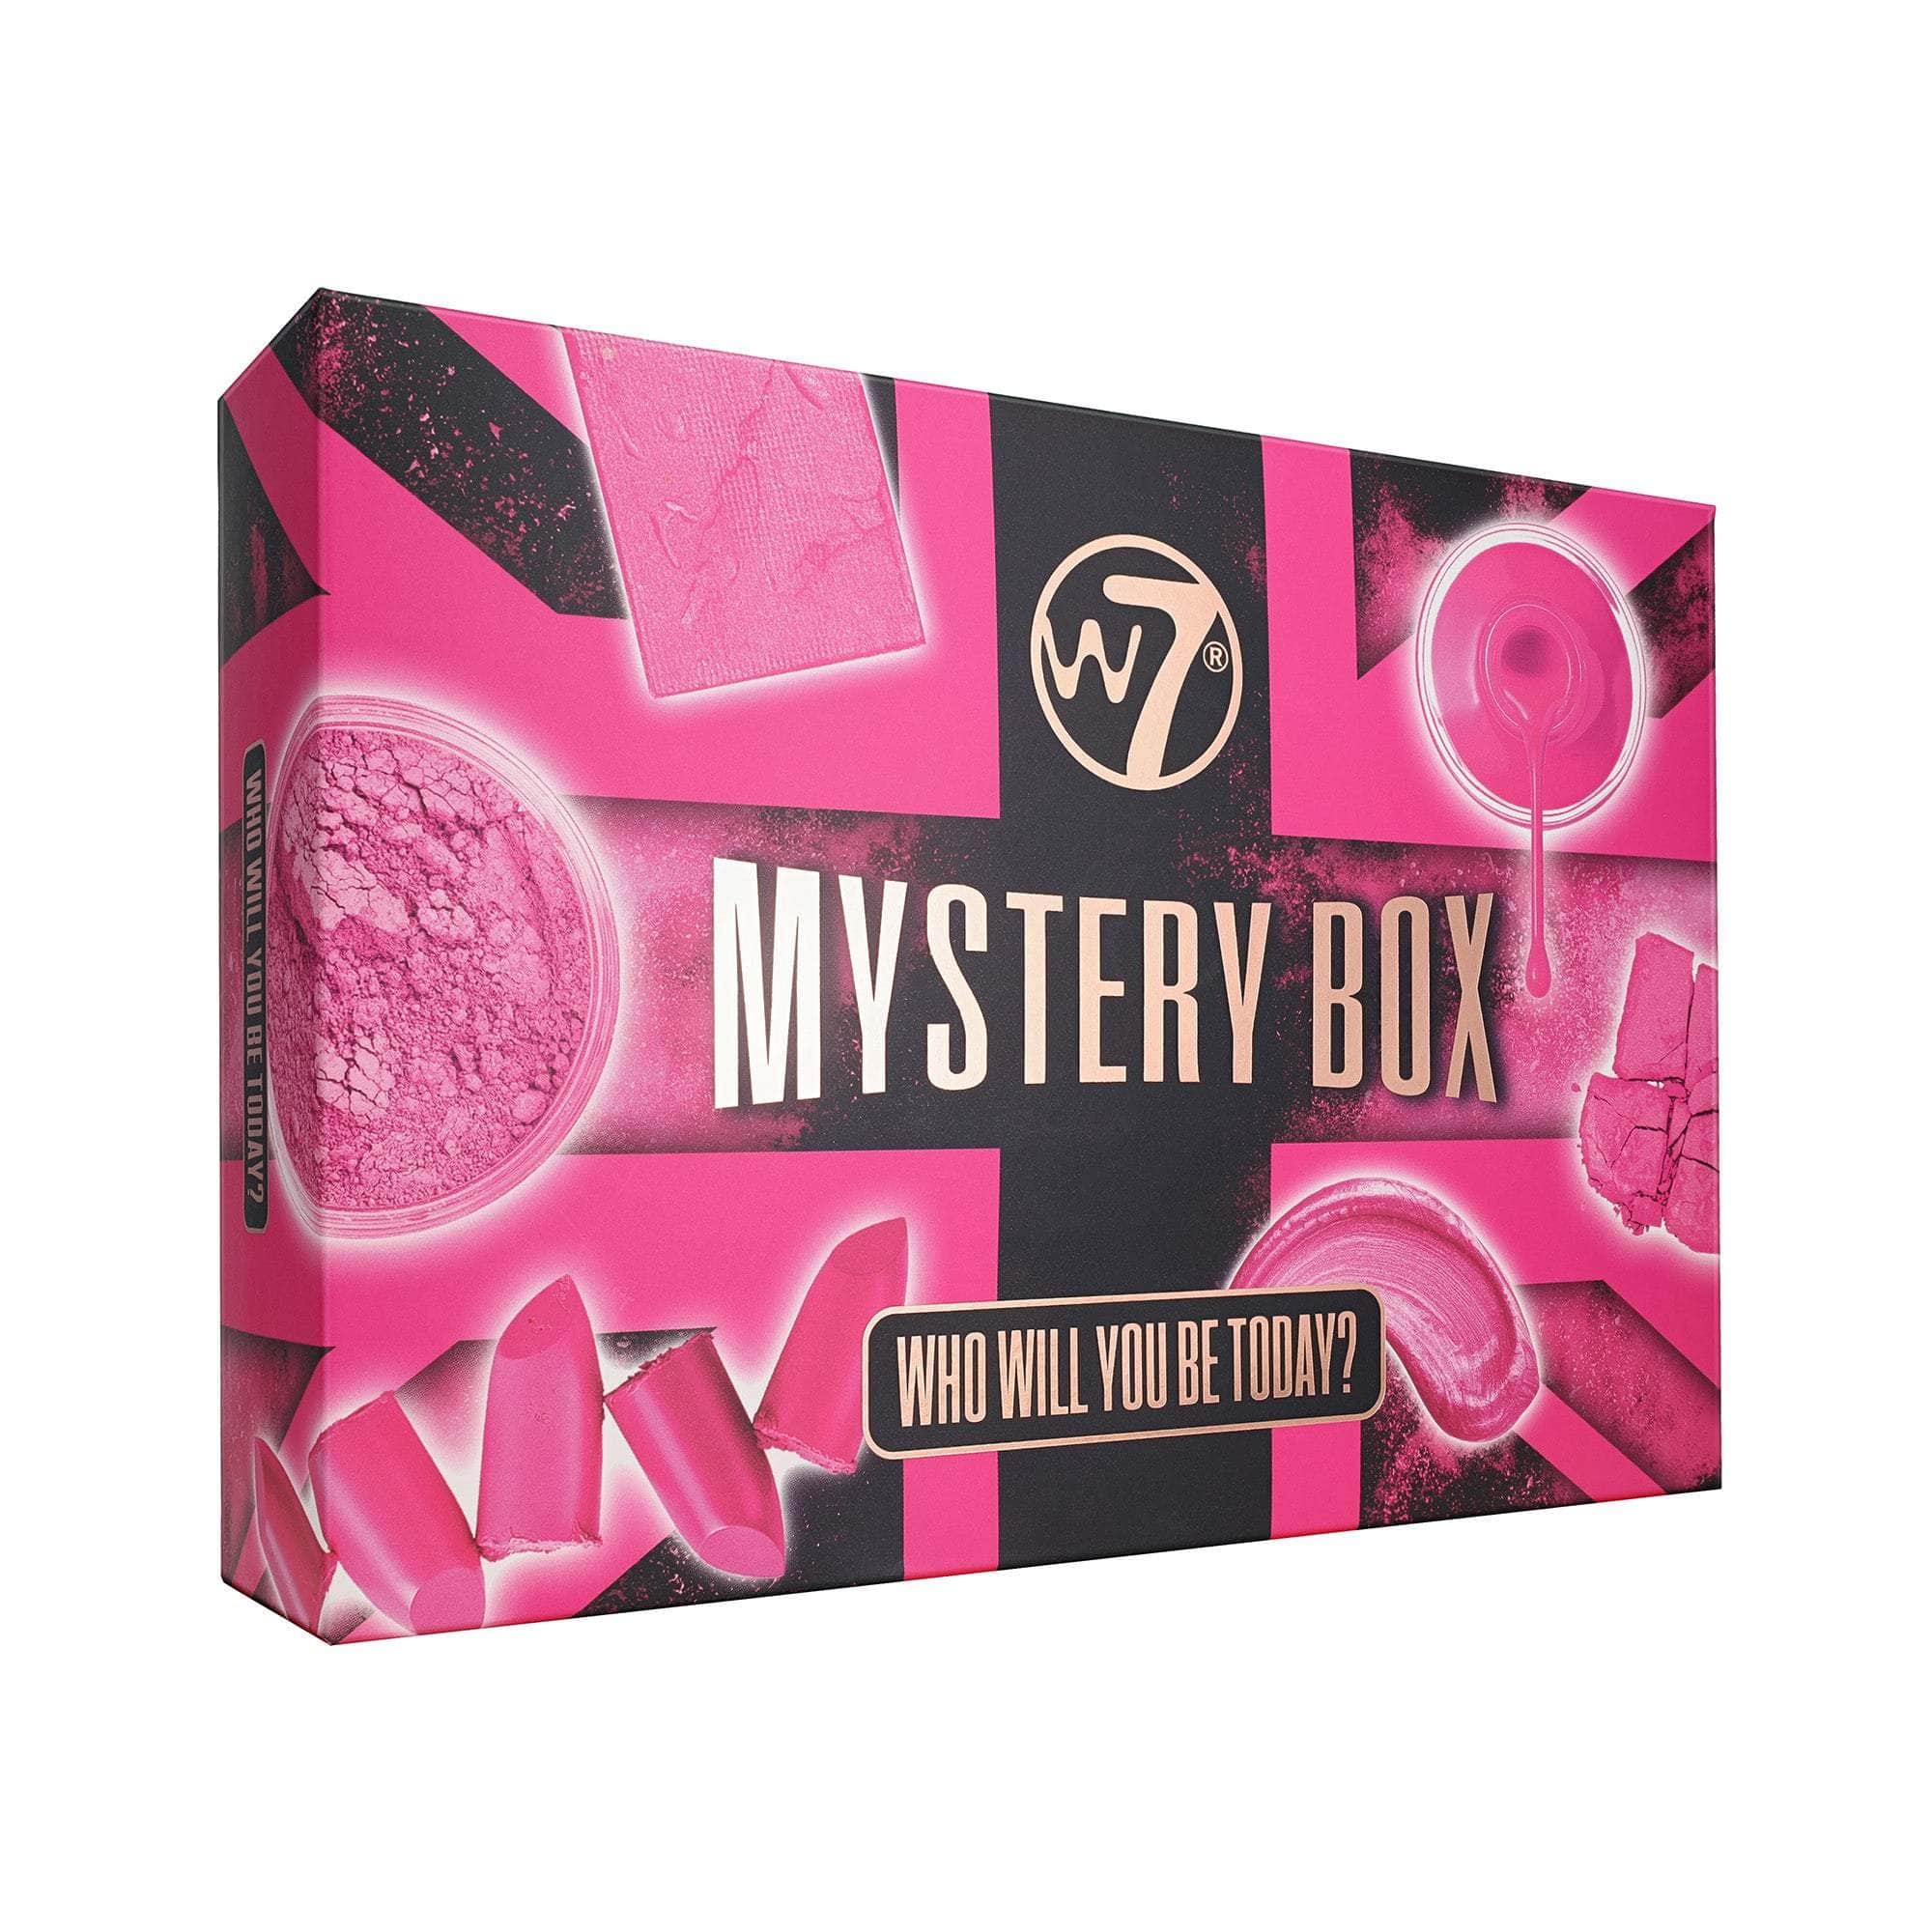 The W7 Mystery Box - W7 Makeup